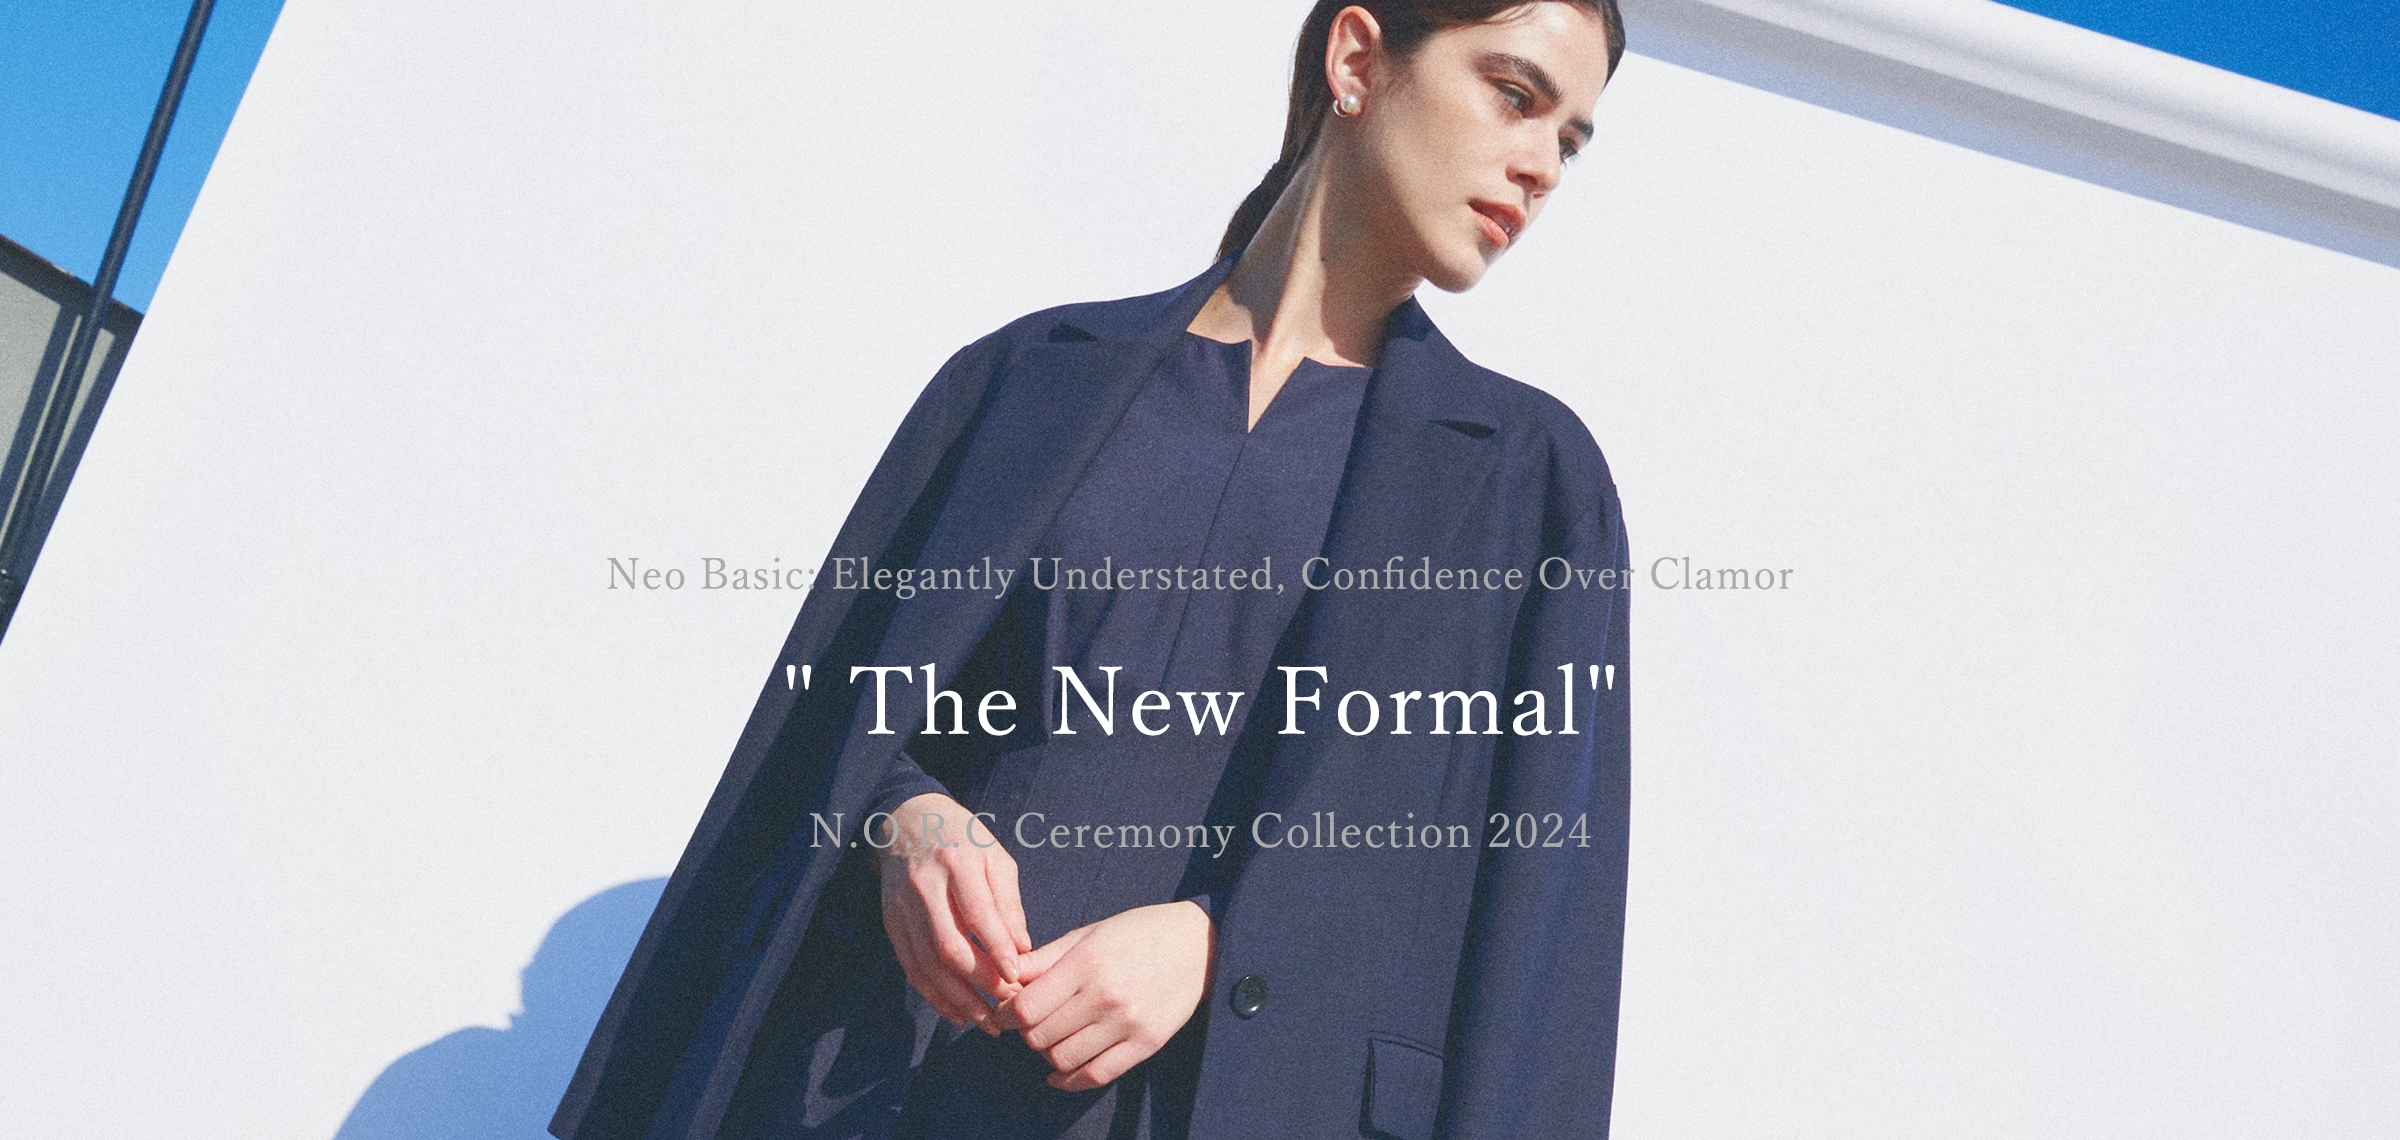 Neo Basic: Elegantly Understated, Confidence Over Clamor  The New Formal N.O.R.C Ceremony Collection 2024